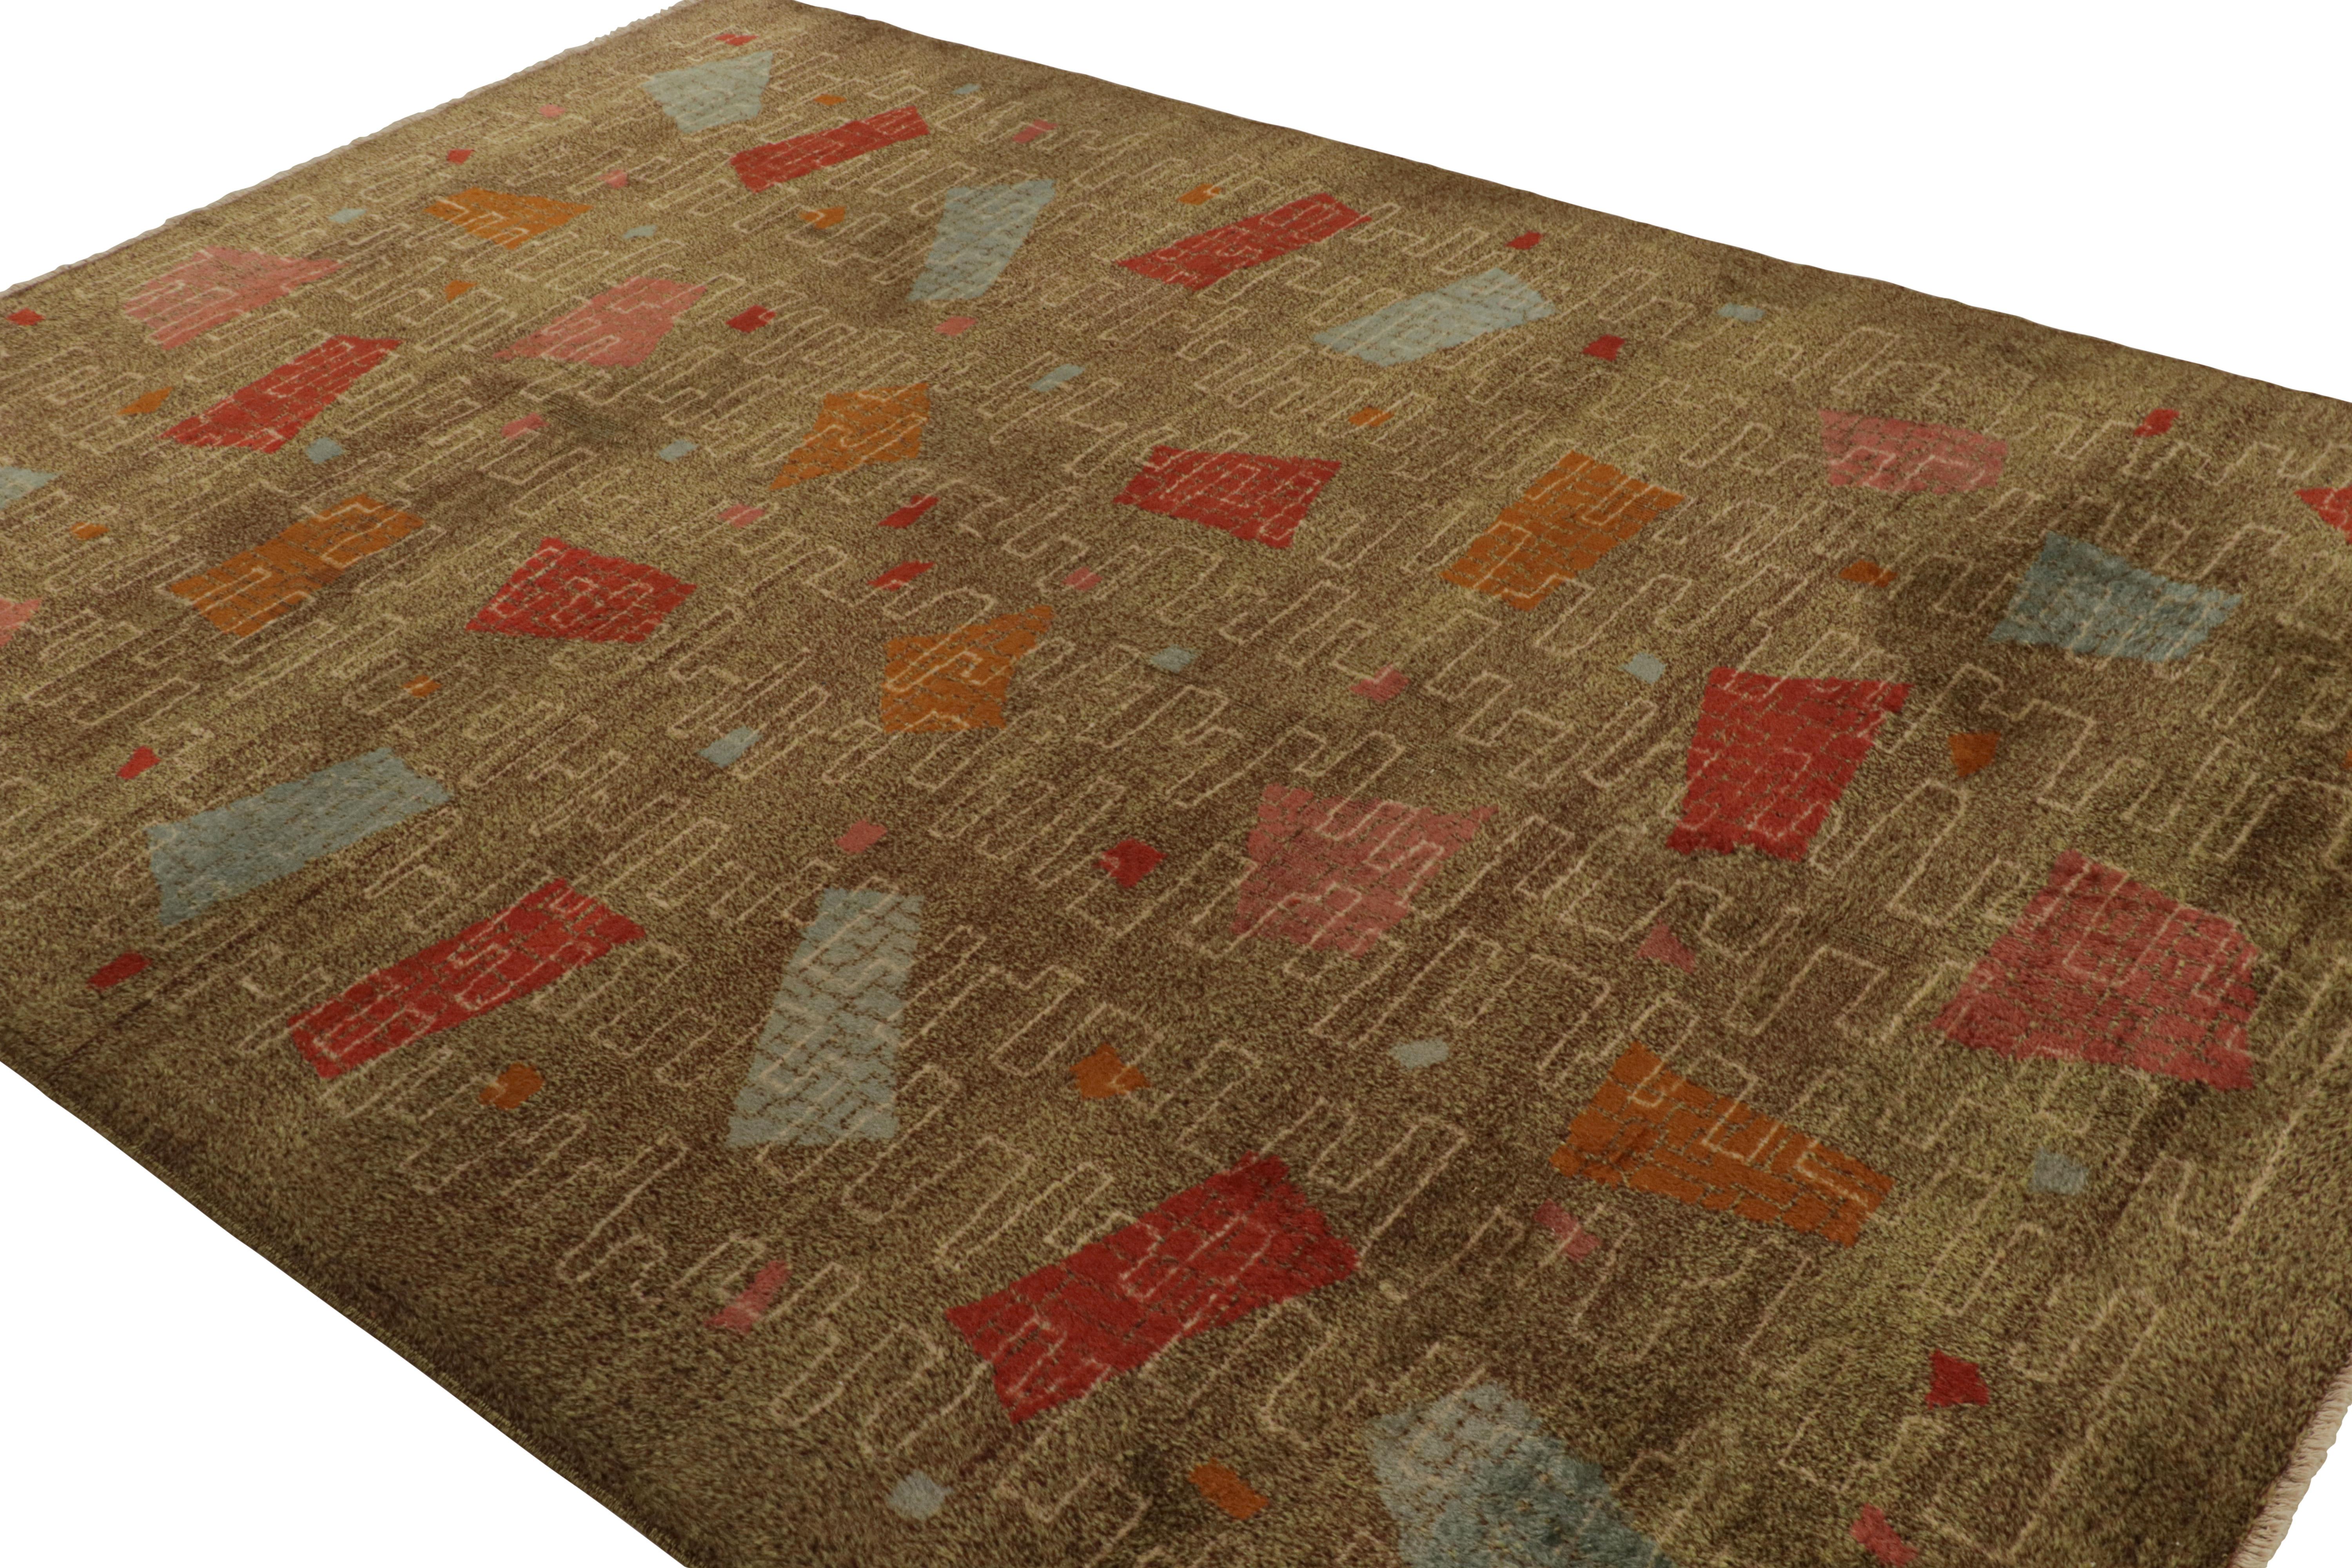 Hand-knotted in wool, circa 1960 - 1970, this 7x10 vintage Müren Art Deco rug is a playful take on French Deco sensibilities in a mid-century modern fashion. 

On the design; 

Connoisseurs will appreciate the play of geometric patterns in red,